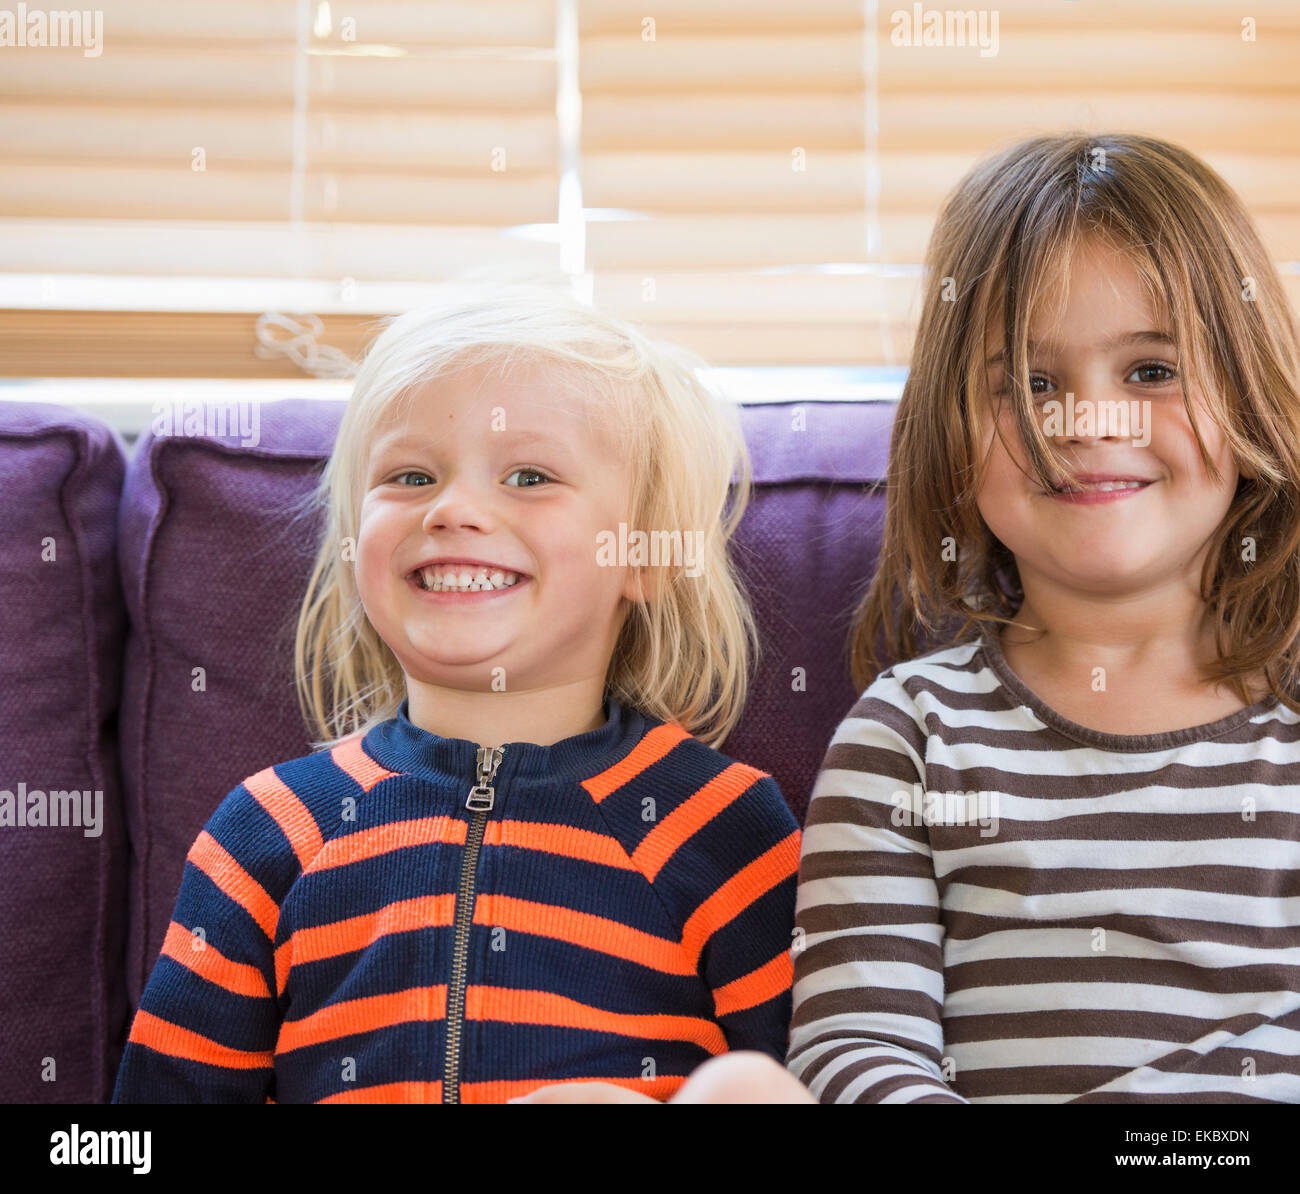 Portrait of young boy and girl, sitting on sofa, smiling Stock Photo